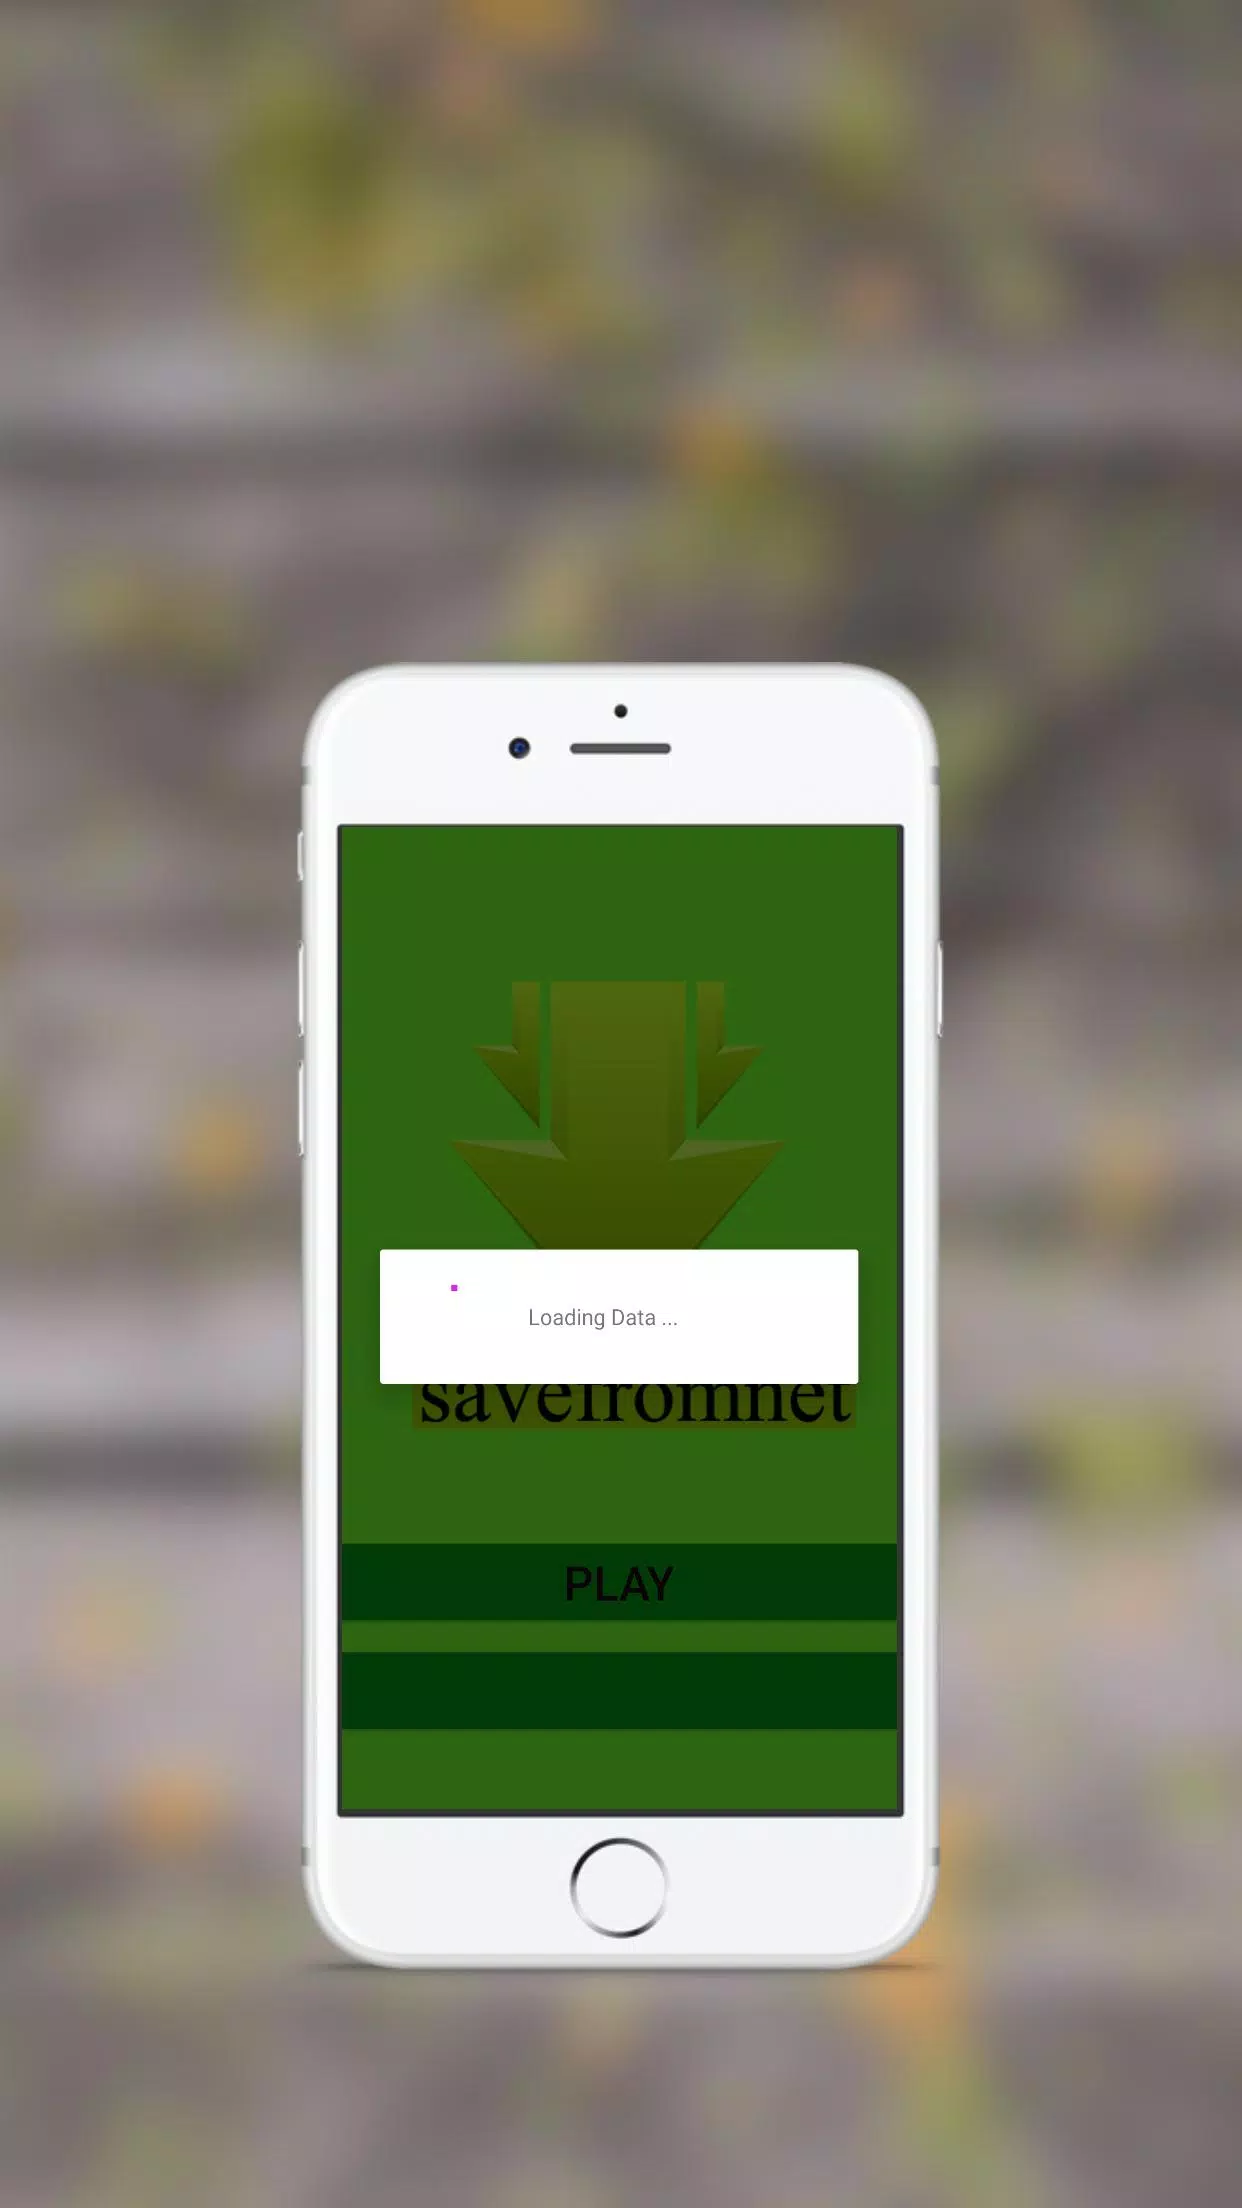 Savefrom.net Mp3 Free Music for Android - APK Download